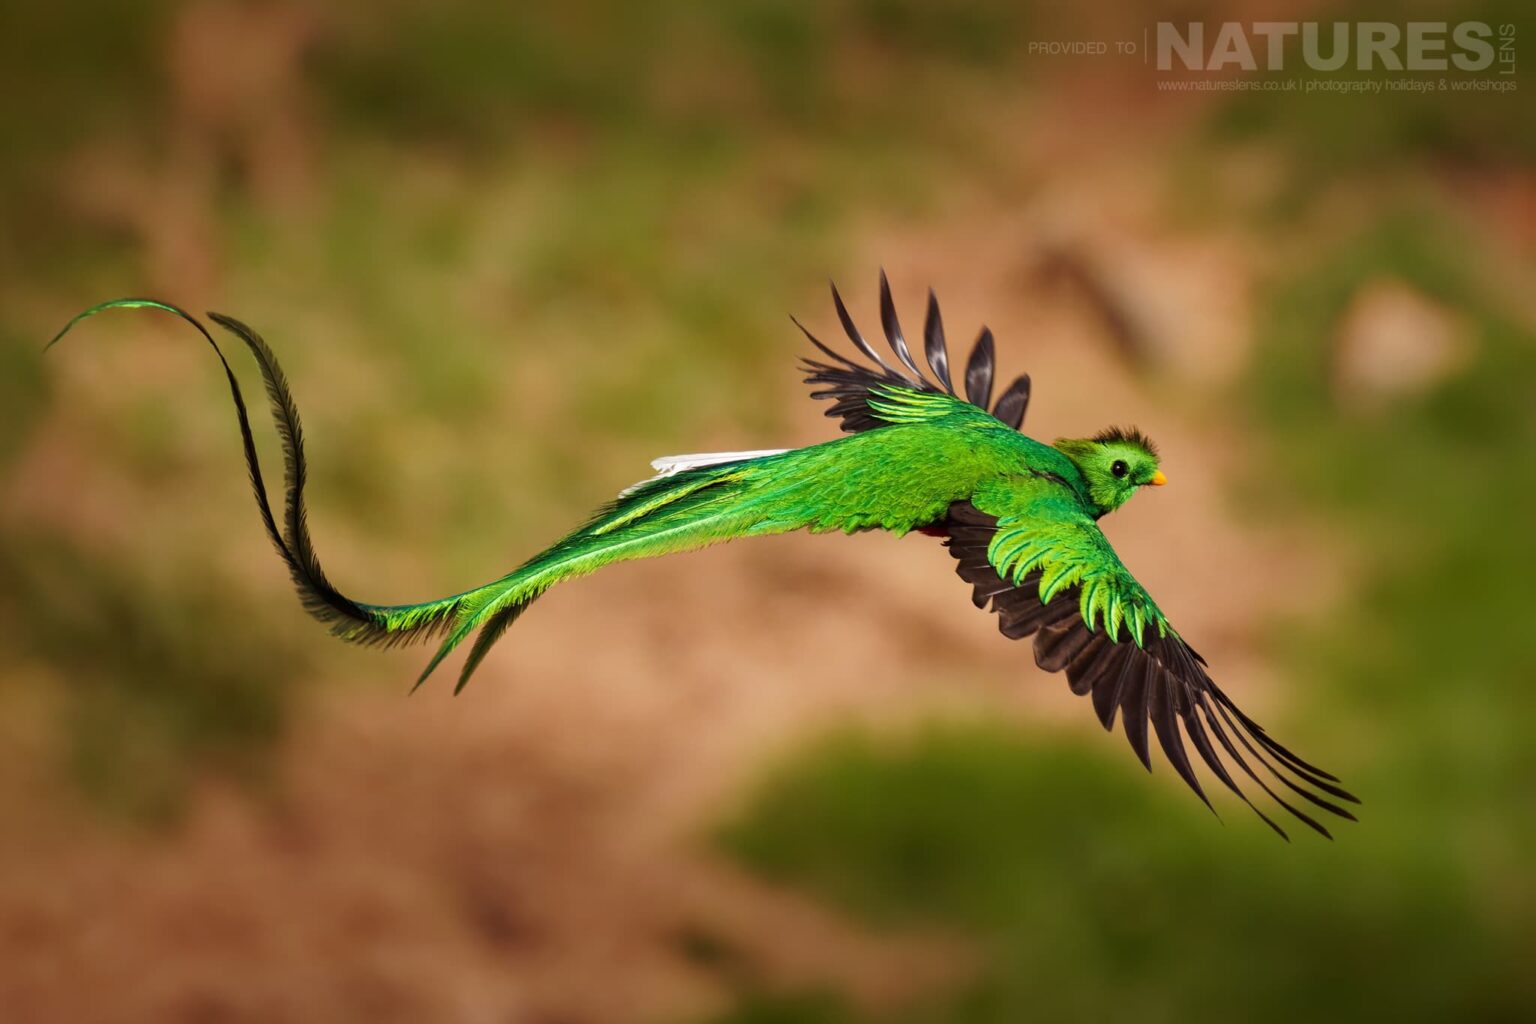 A magnificent Respendent Quetzal in flight - which can be photographed during the NaturesLens Quetzals & Other Iconic Wildlife of Costa Rica photography holiday